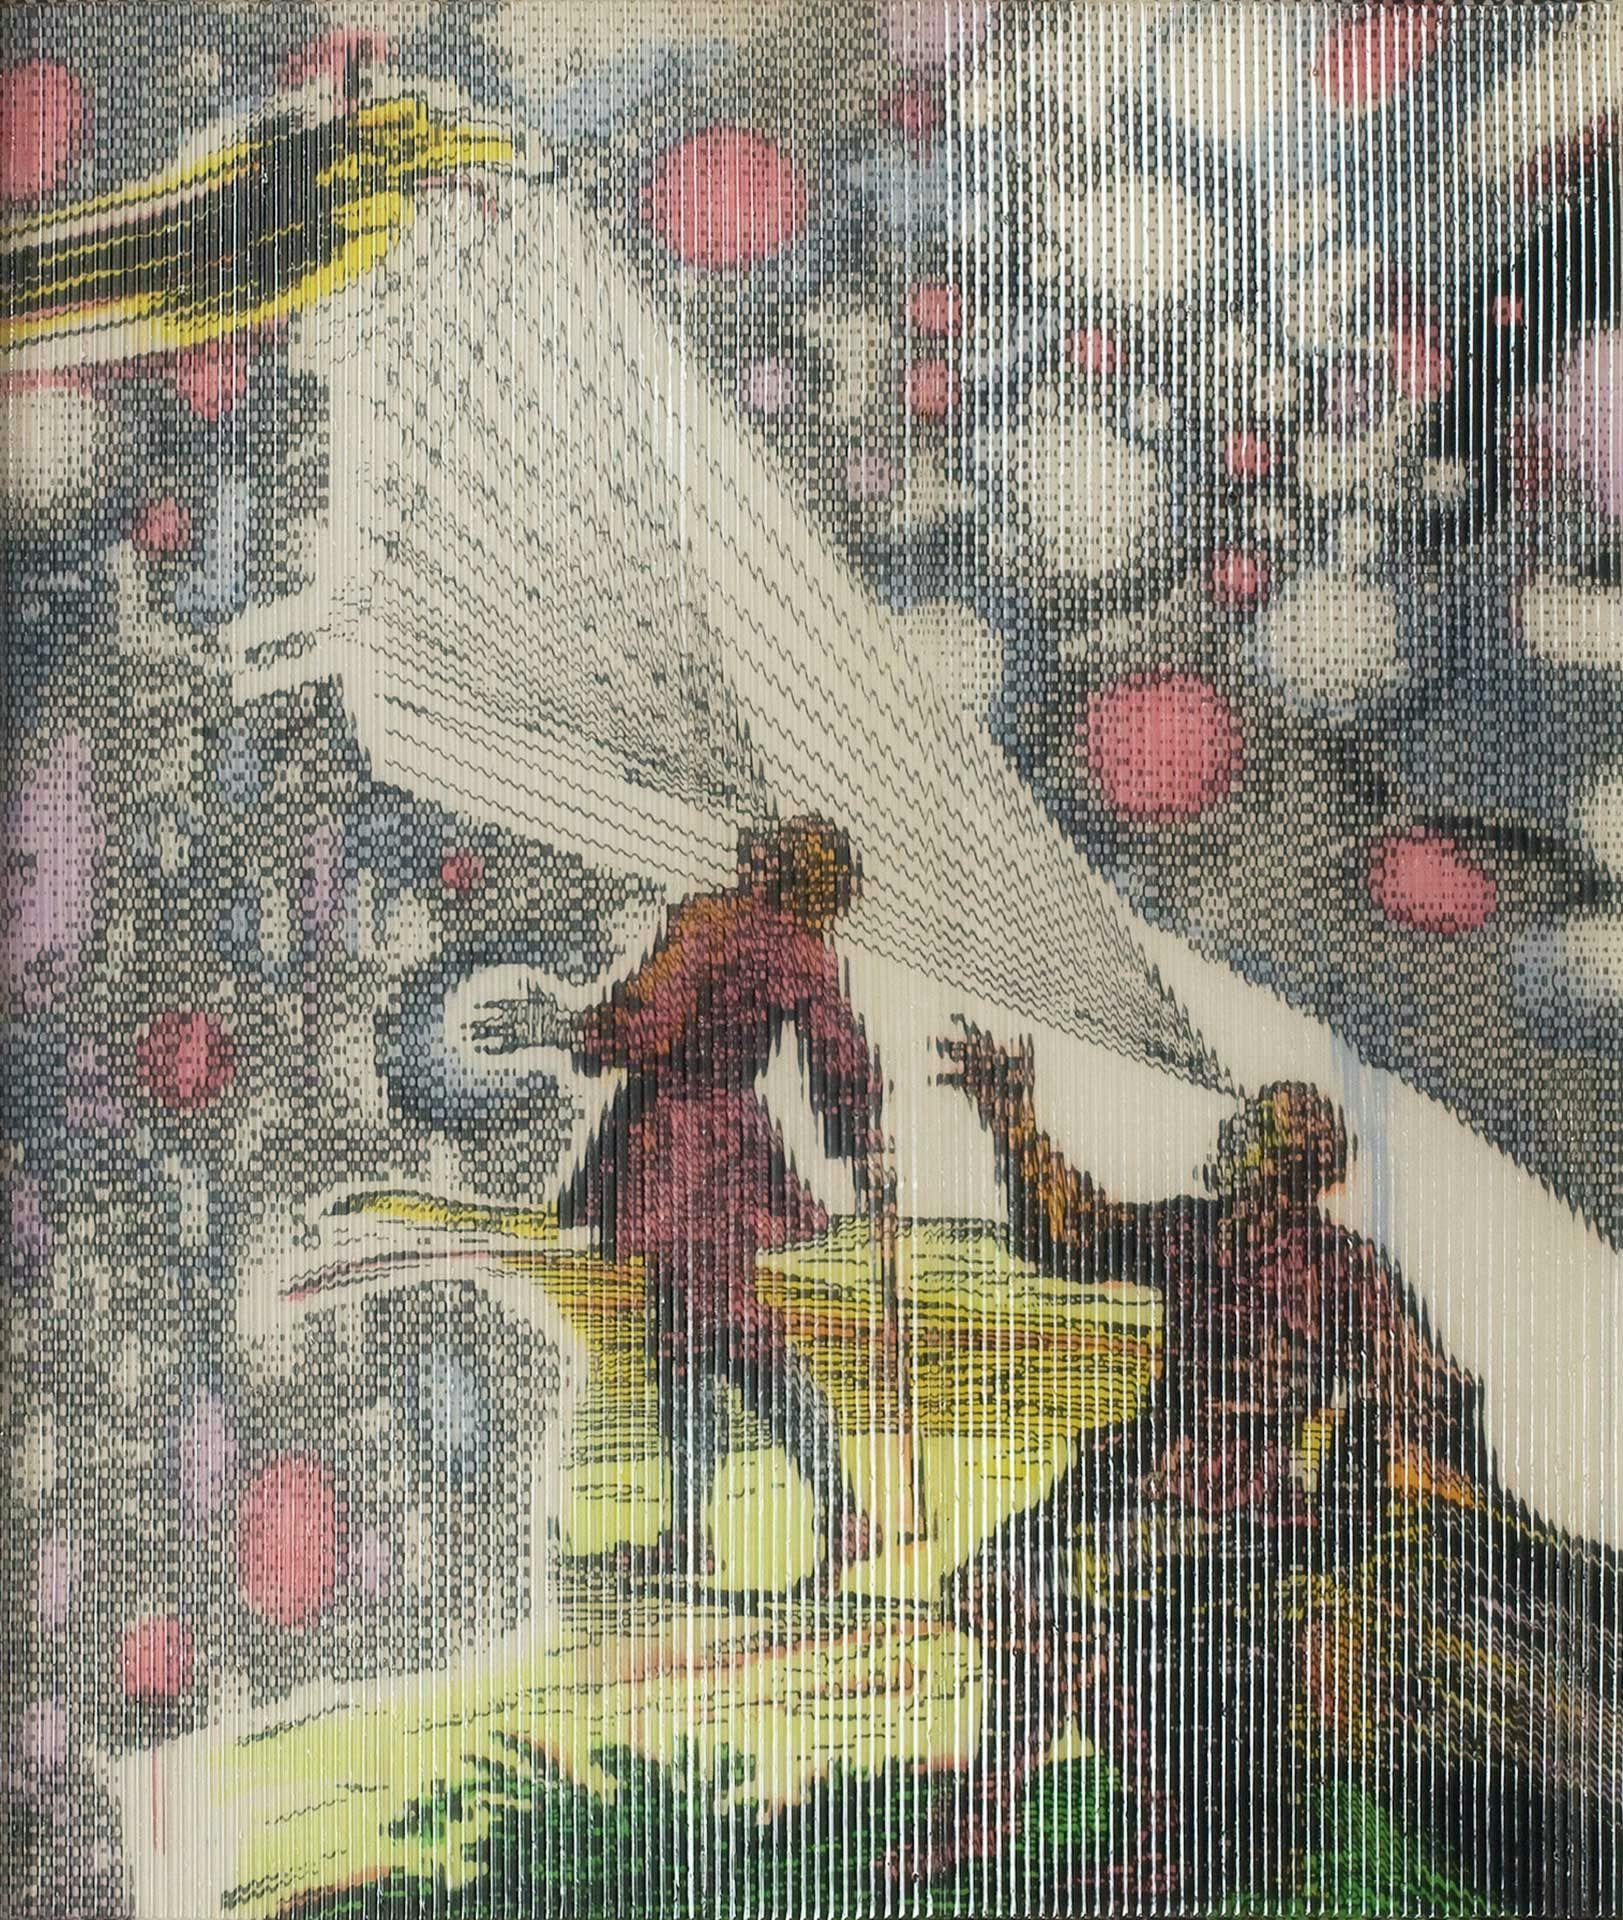 A painting by Sigmar Polke titled Strahlen Sehen Jenseits des Regenbogens, translated as Seeing Rays [Beyond the Rainbow]), dated 2006-07.